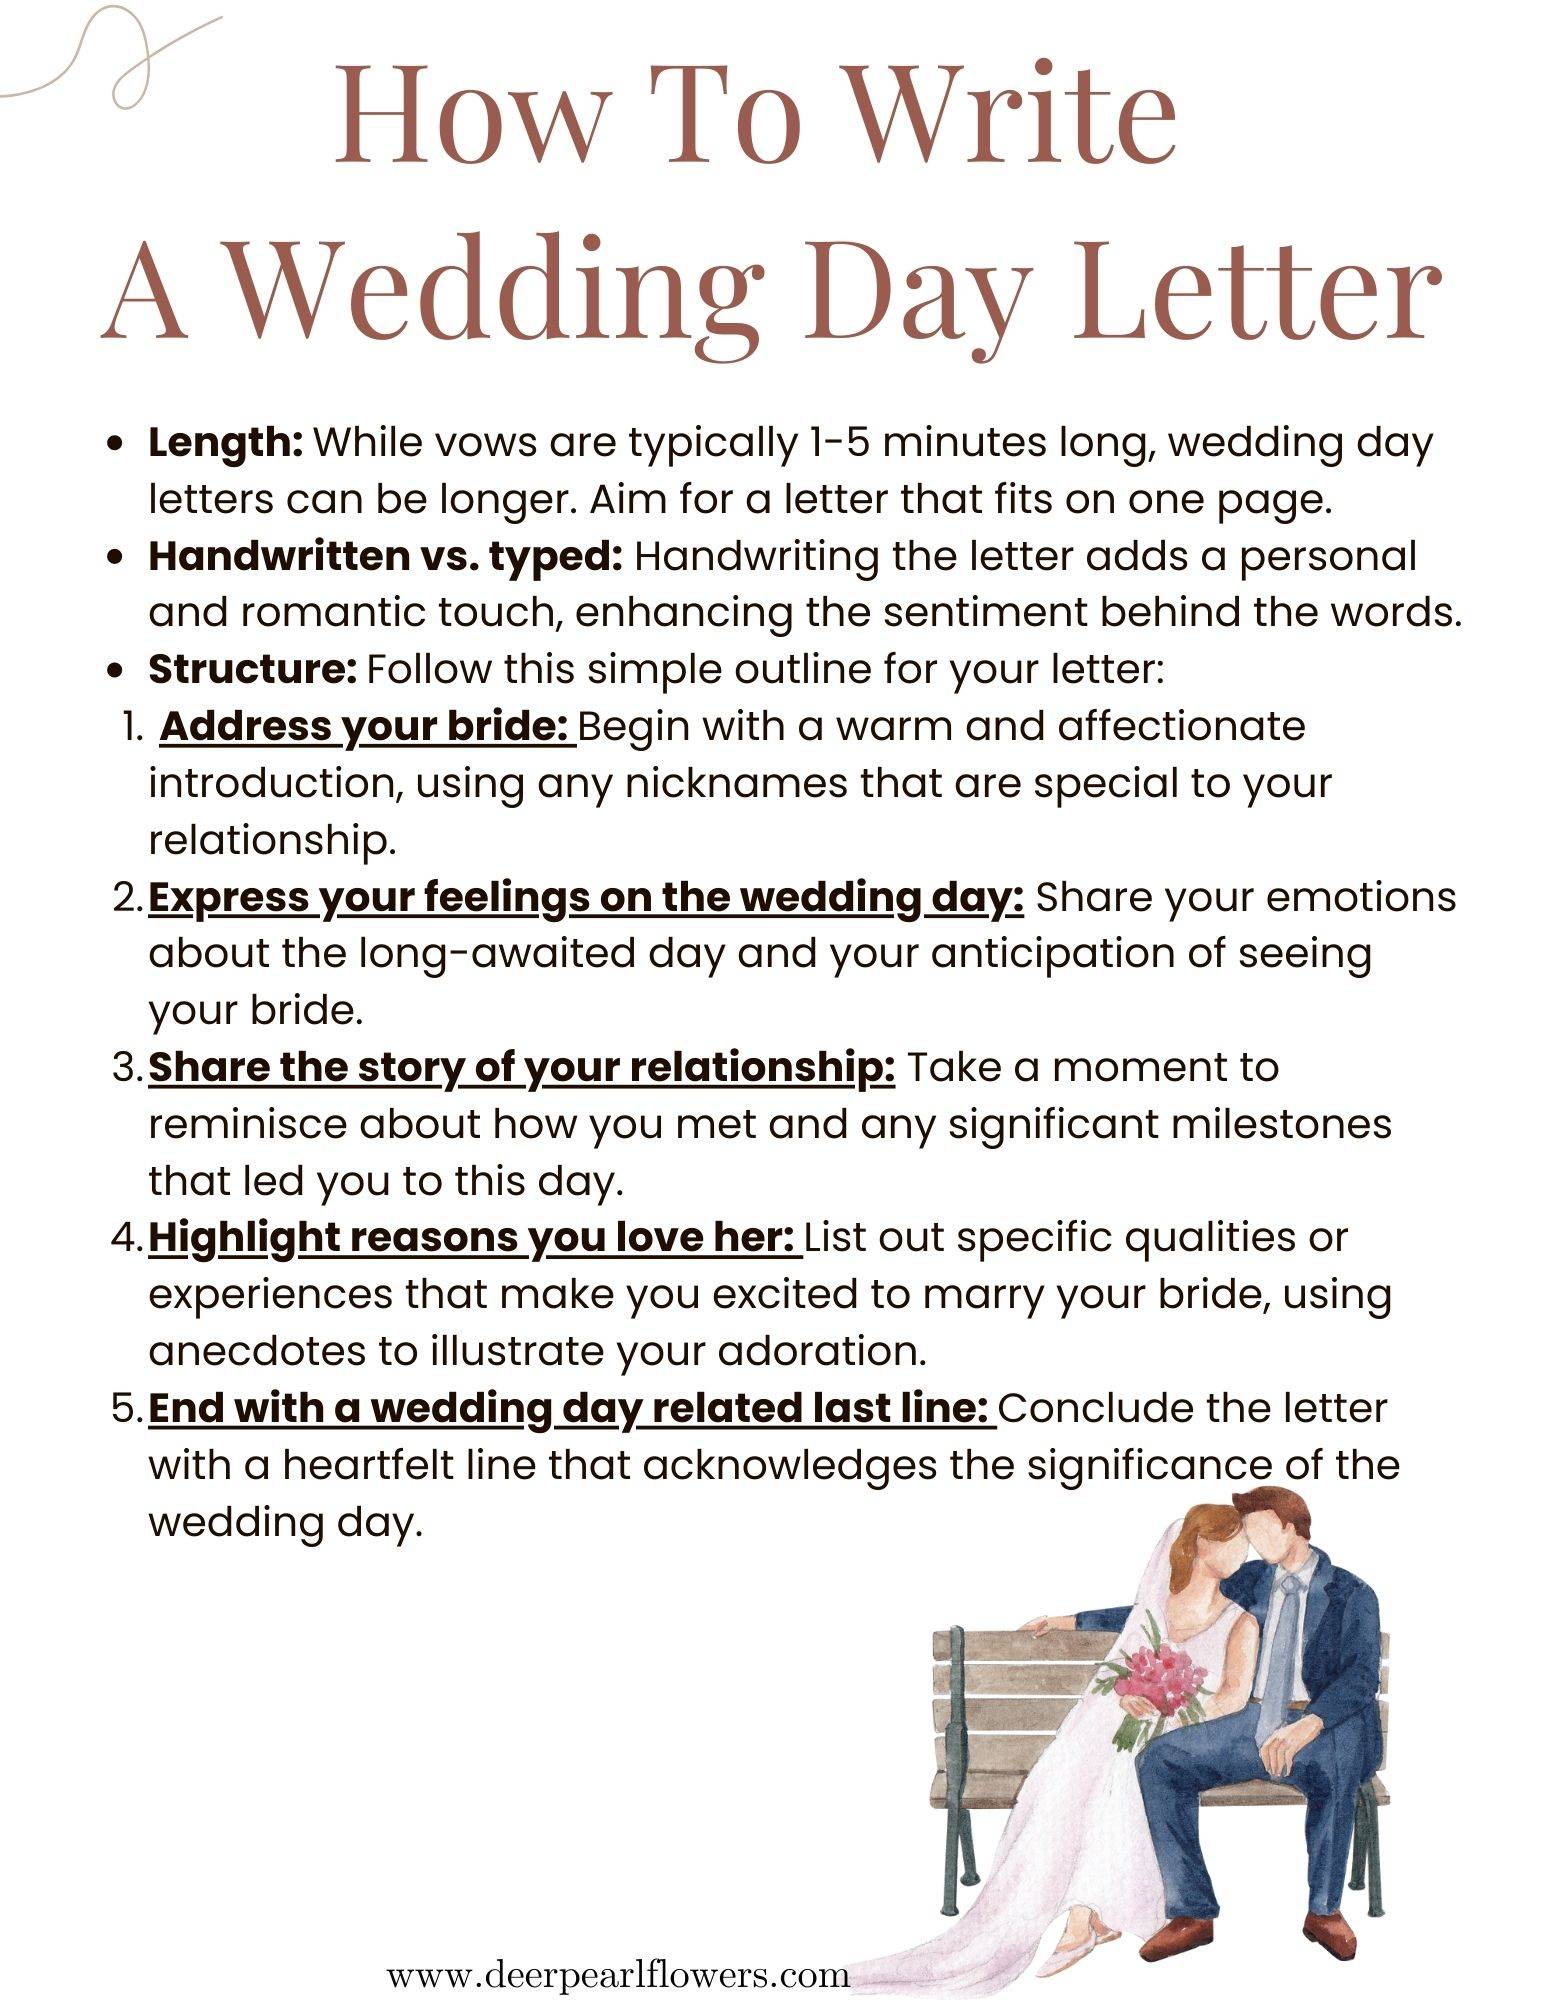 How to Write A Letter to Bride from Groom